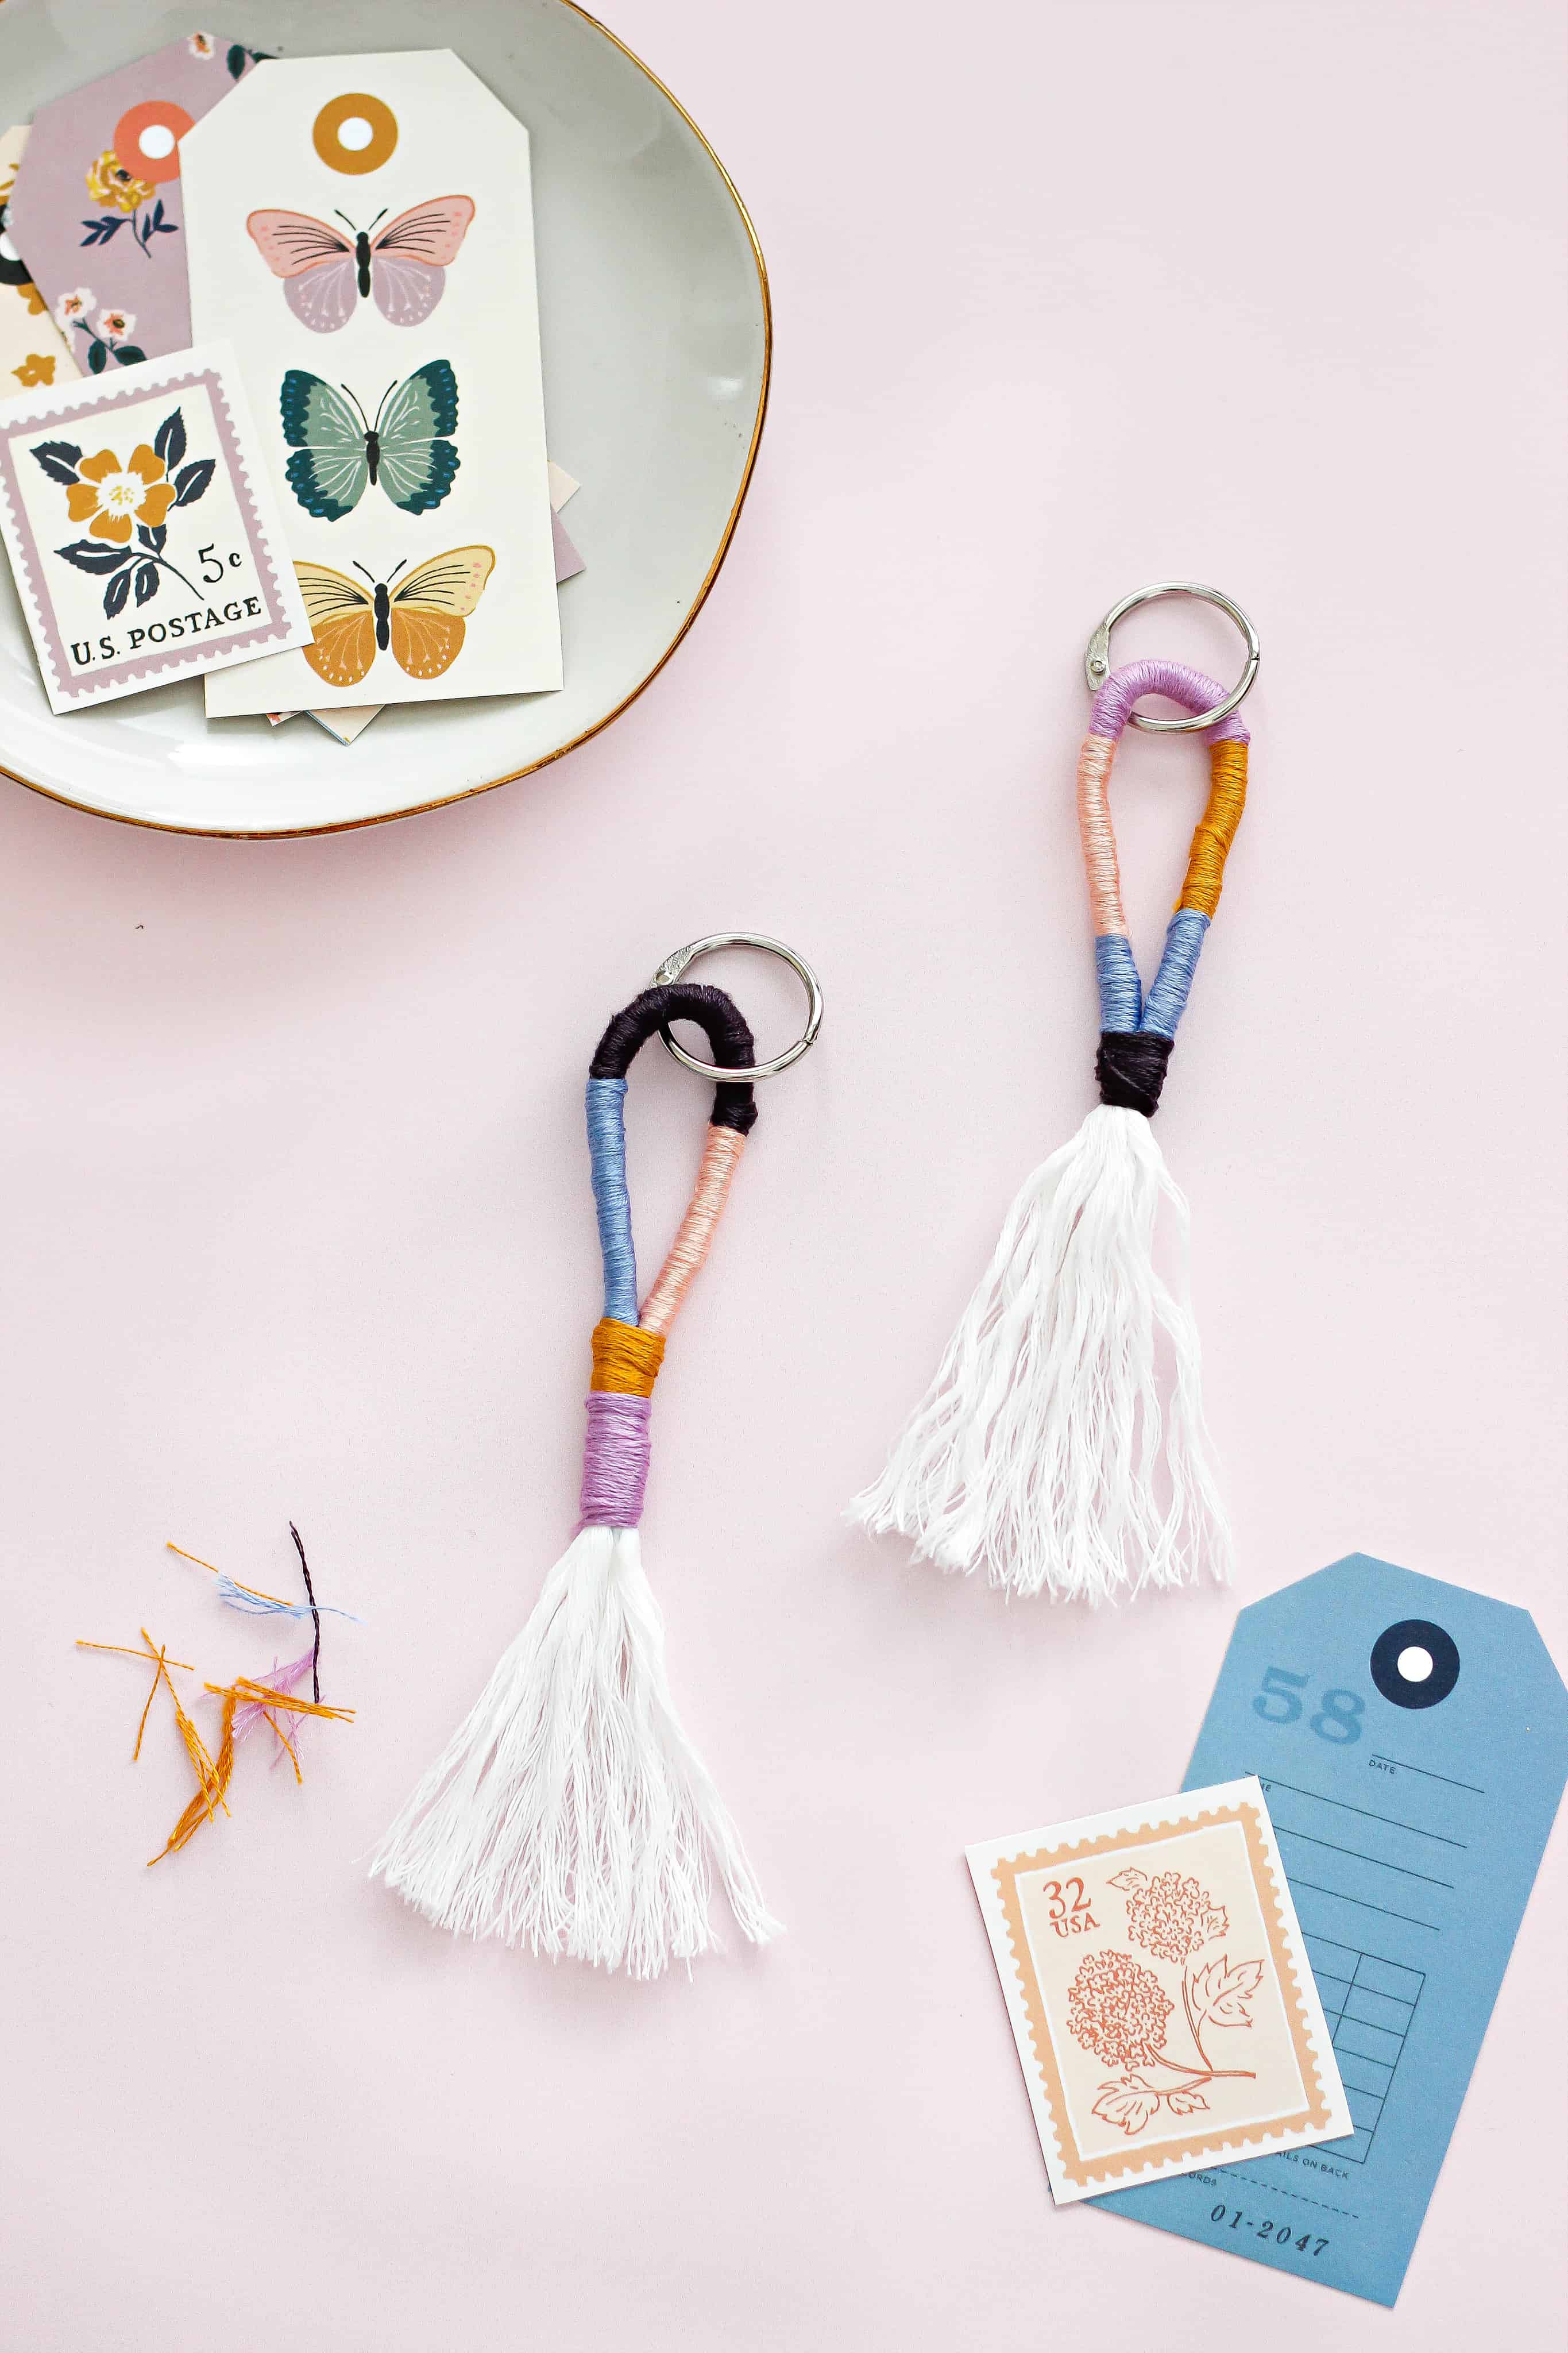 10 DIY KEYCHAINS - How To Make Cute Keychains 